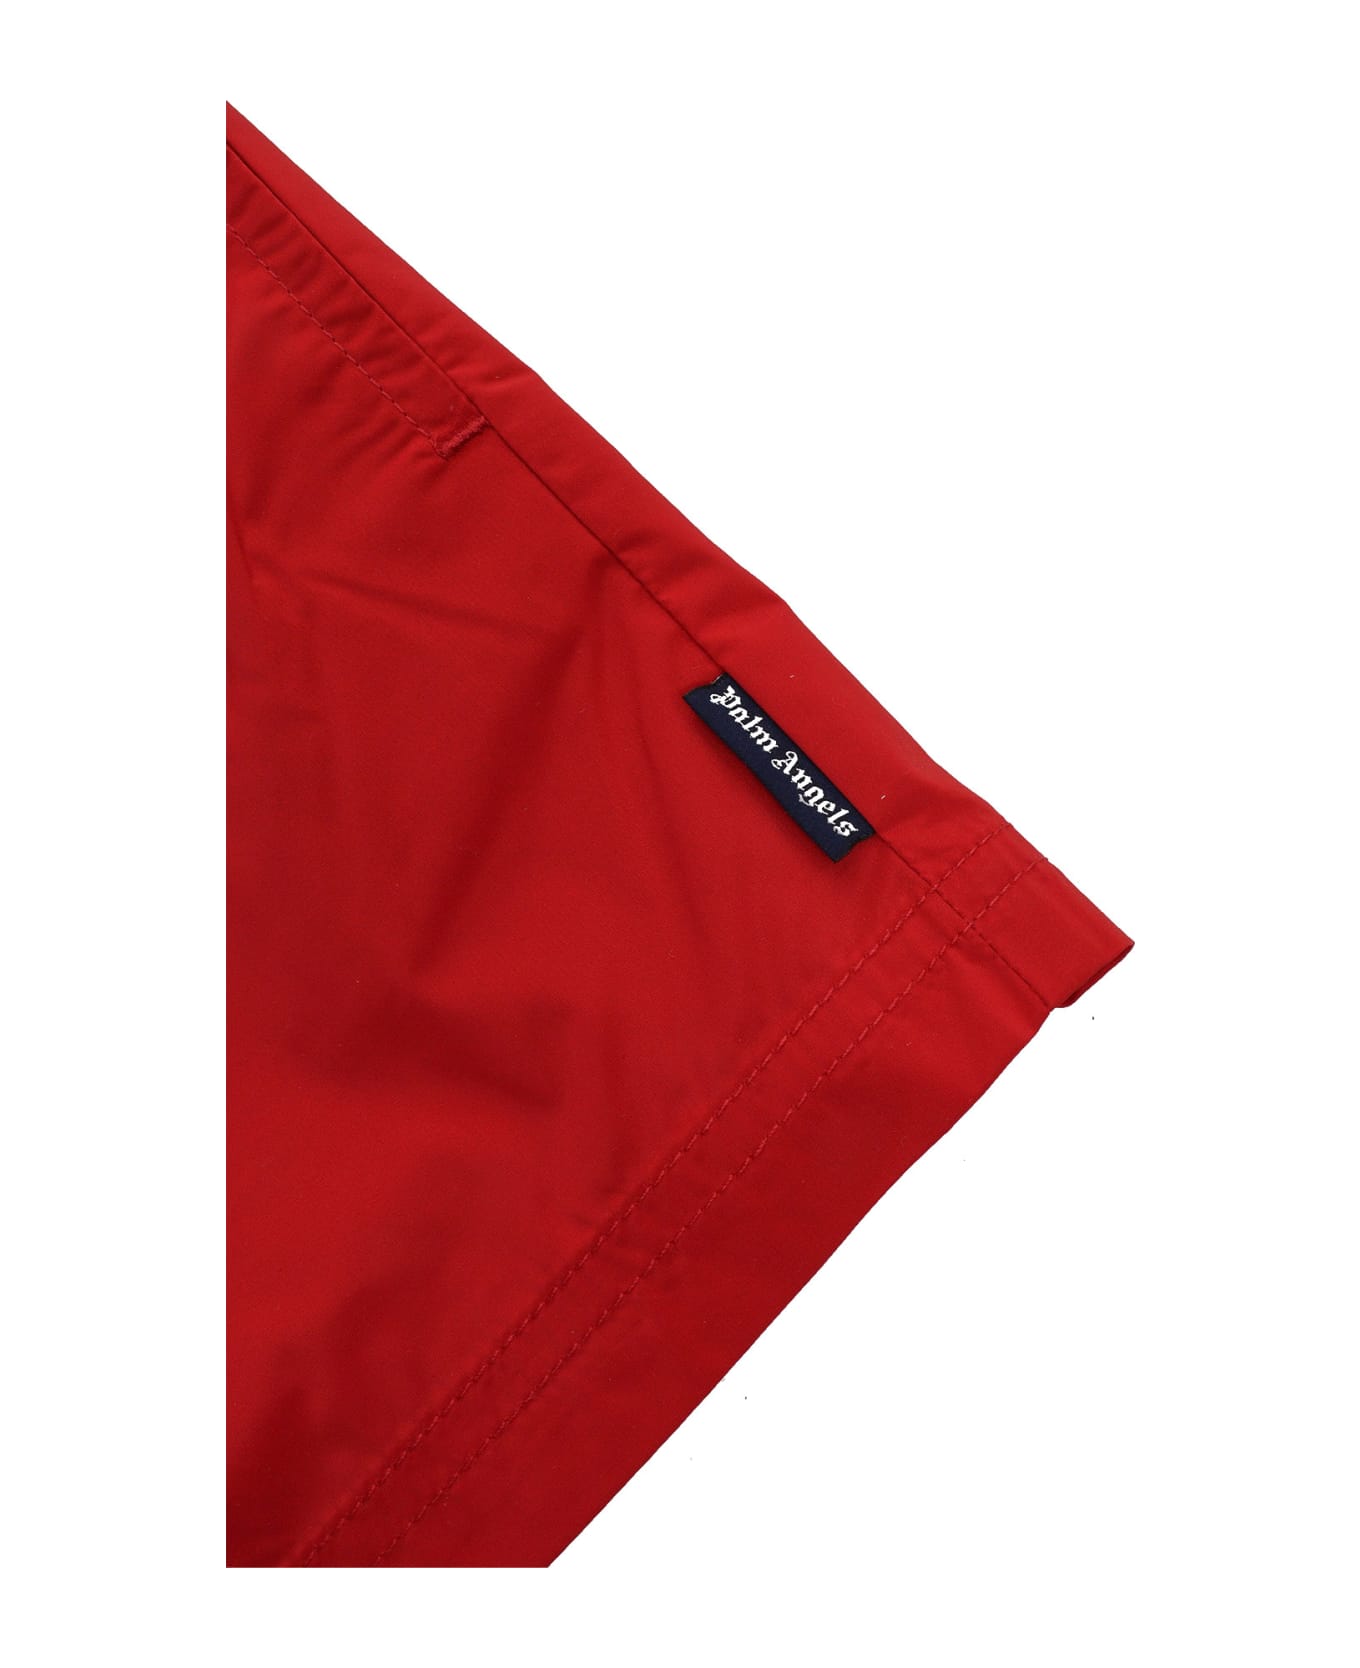 Palm Angels Curved Logo Swim Trunks - RED